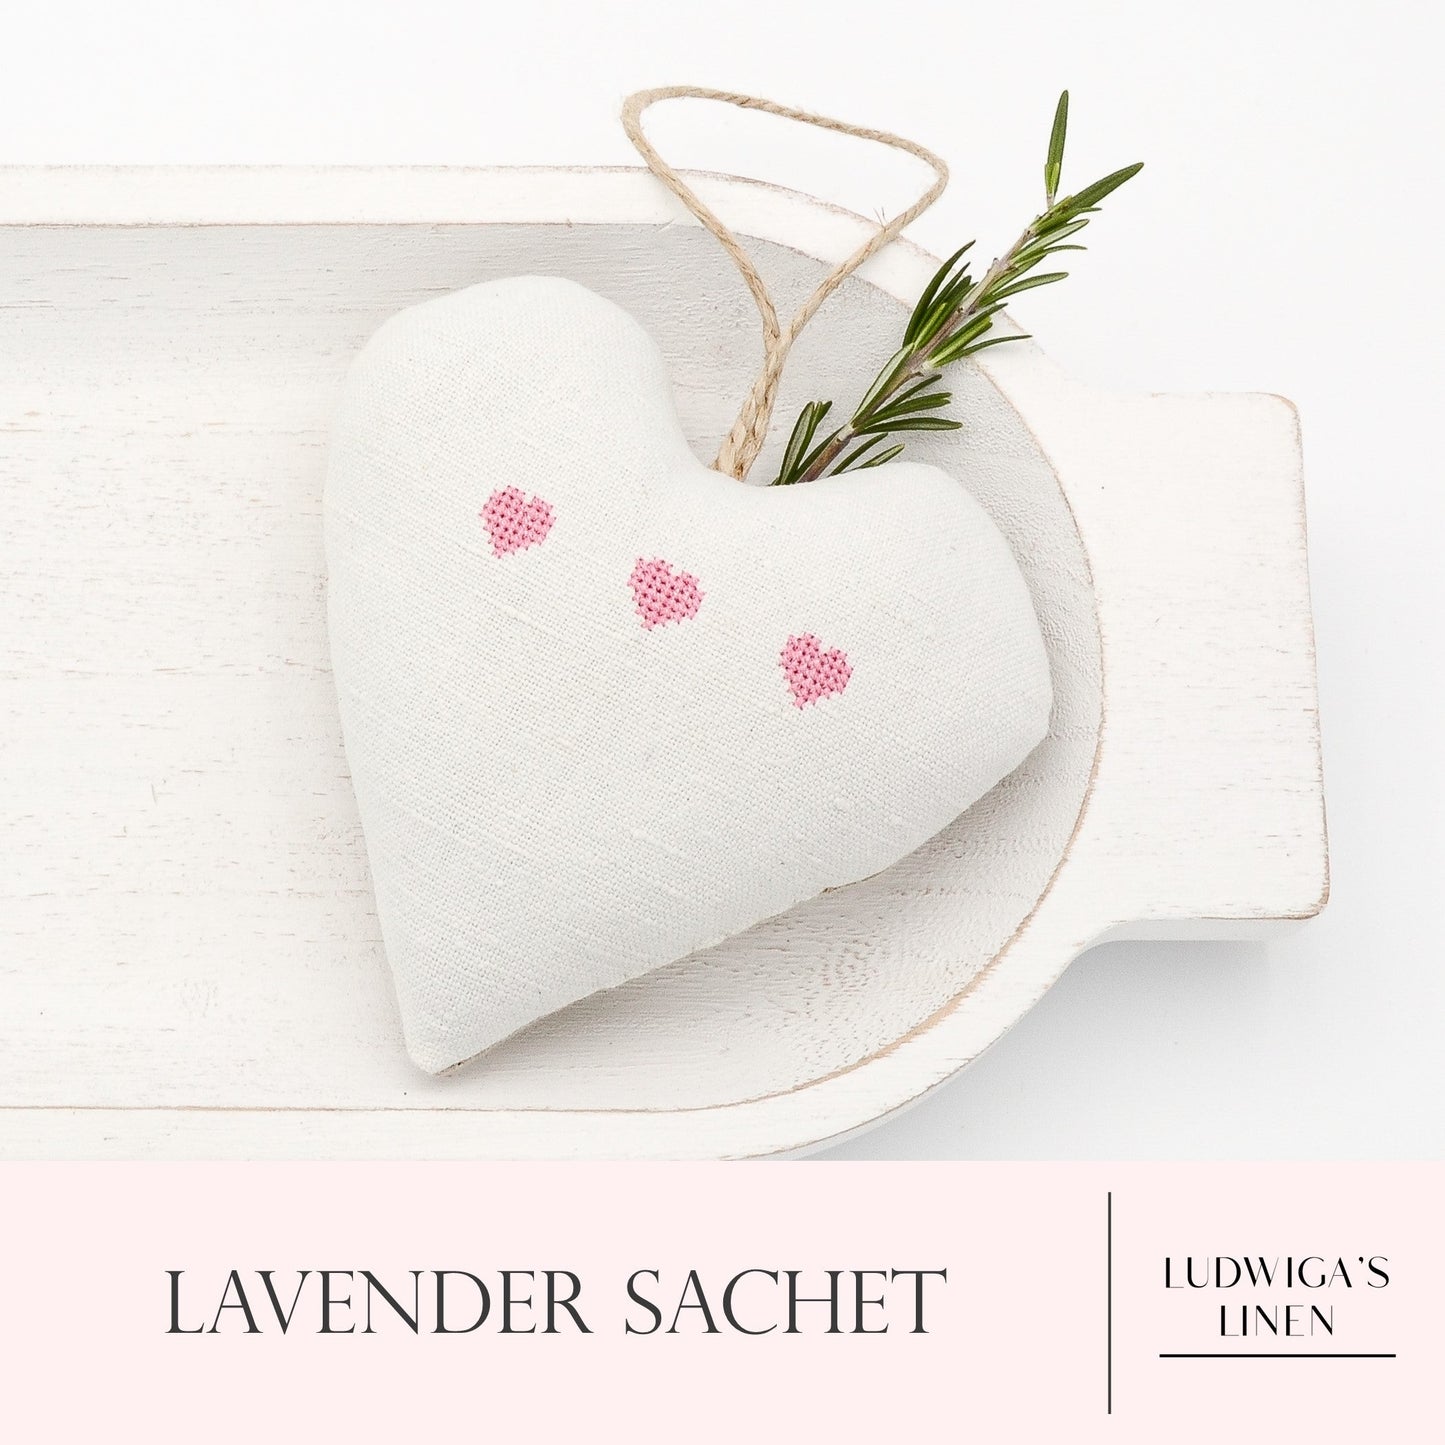 Antique/vintage European white linen lavender sachet heart with three pink embroidered hearts, hemp twine tie and filled with high quality lavender from Provence France